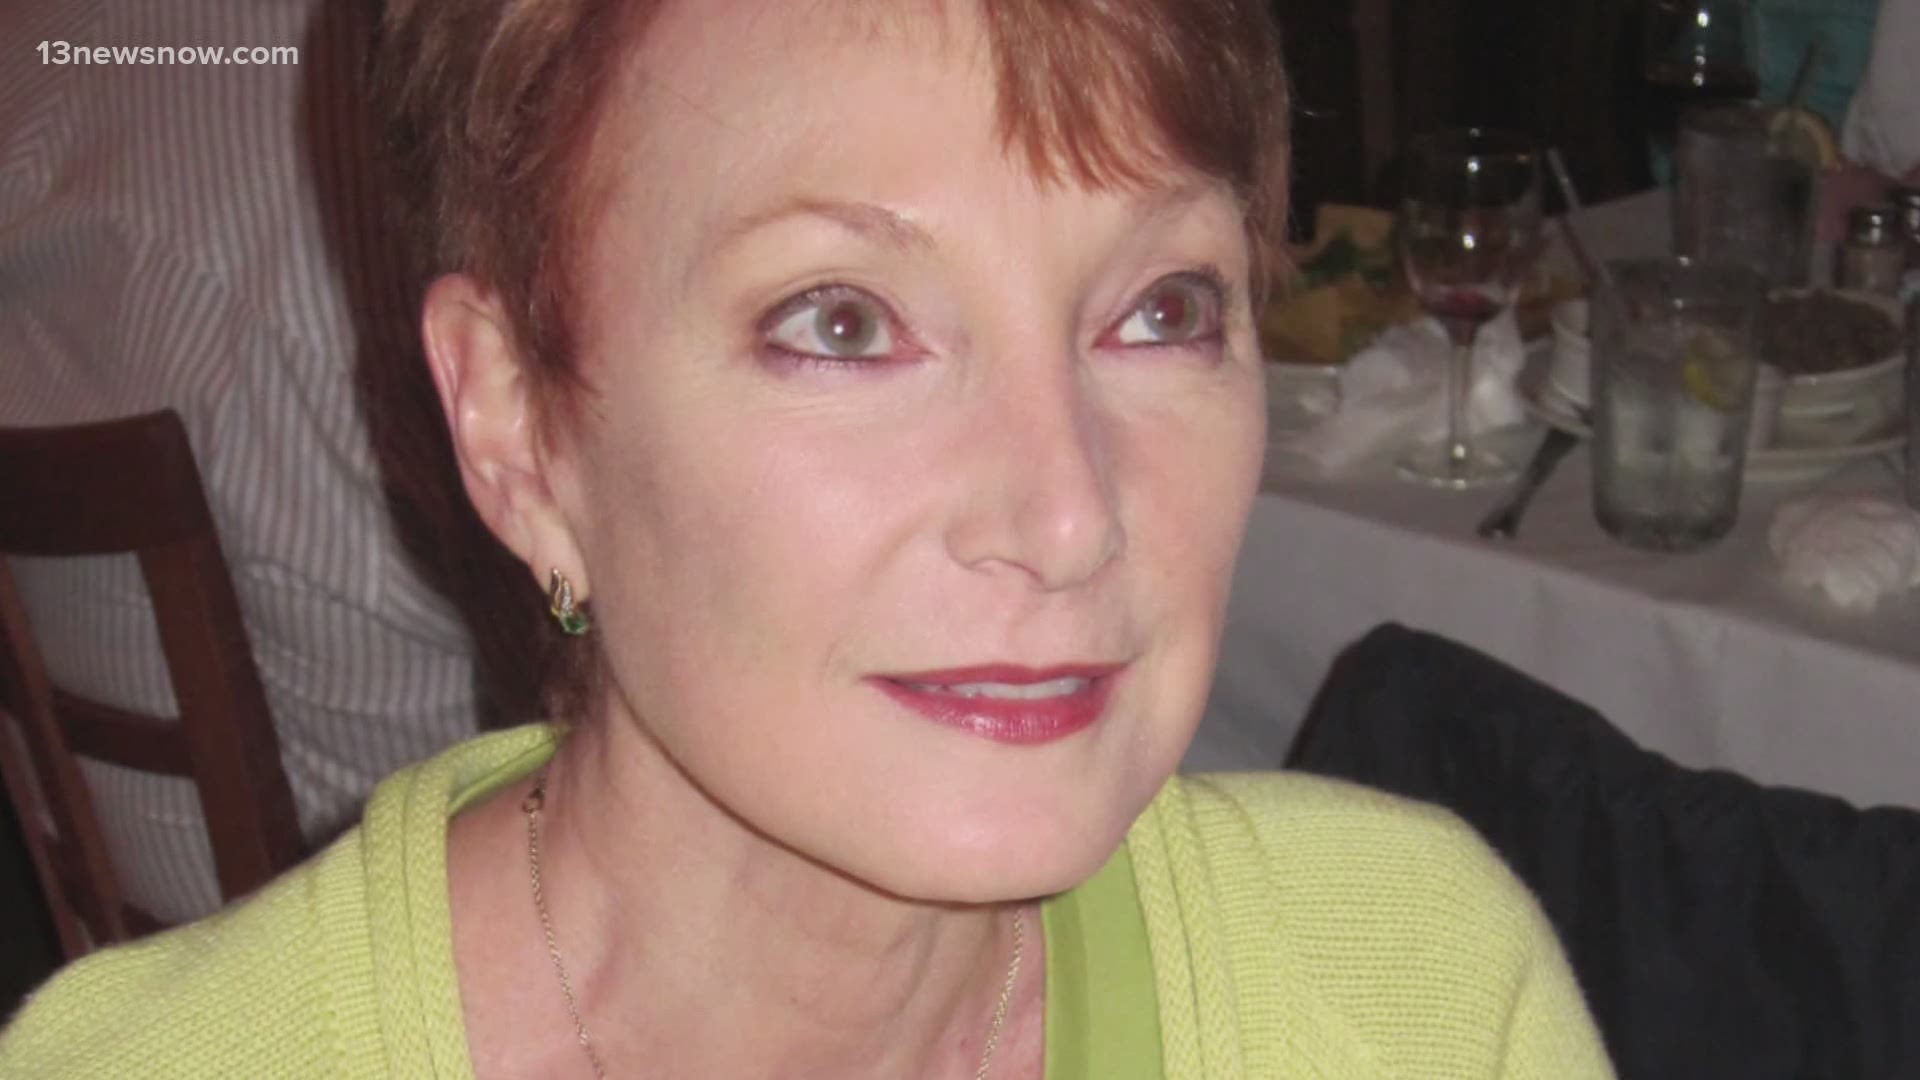 Jane Gardner battled cancer several times, and she bravely shared her journey with others.